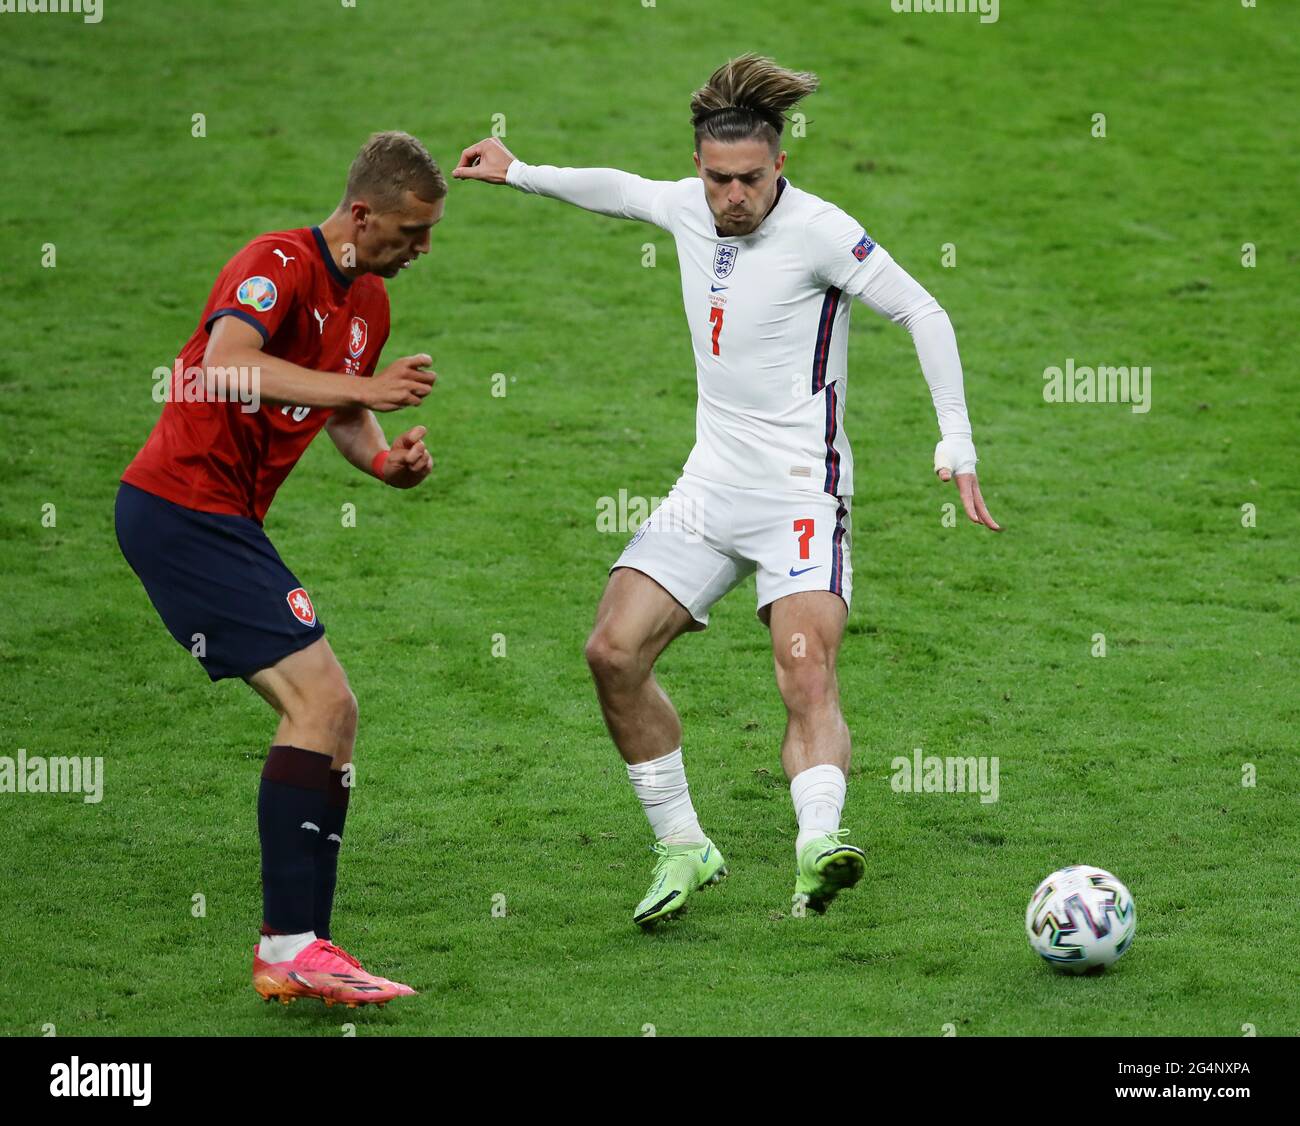 London, England, 22nd June 2021.  Tomas Soucek of Czech Republic tackles Jack Grealish of England during the UEFA European Championships match at Wembley Stadium, London. Picture credit should read: David Klein / Sportimage Stock Photo